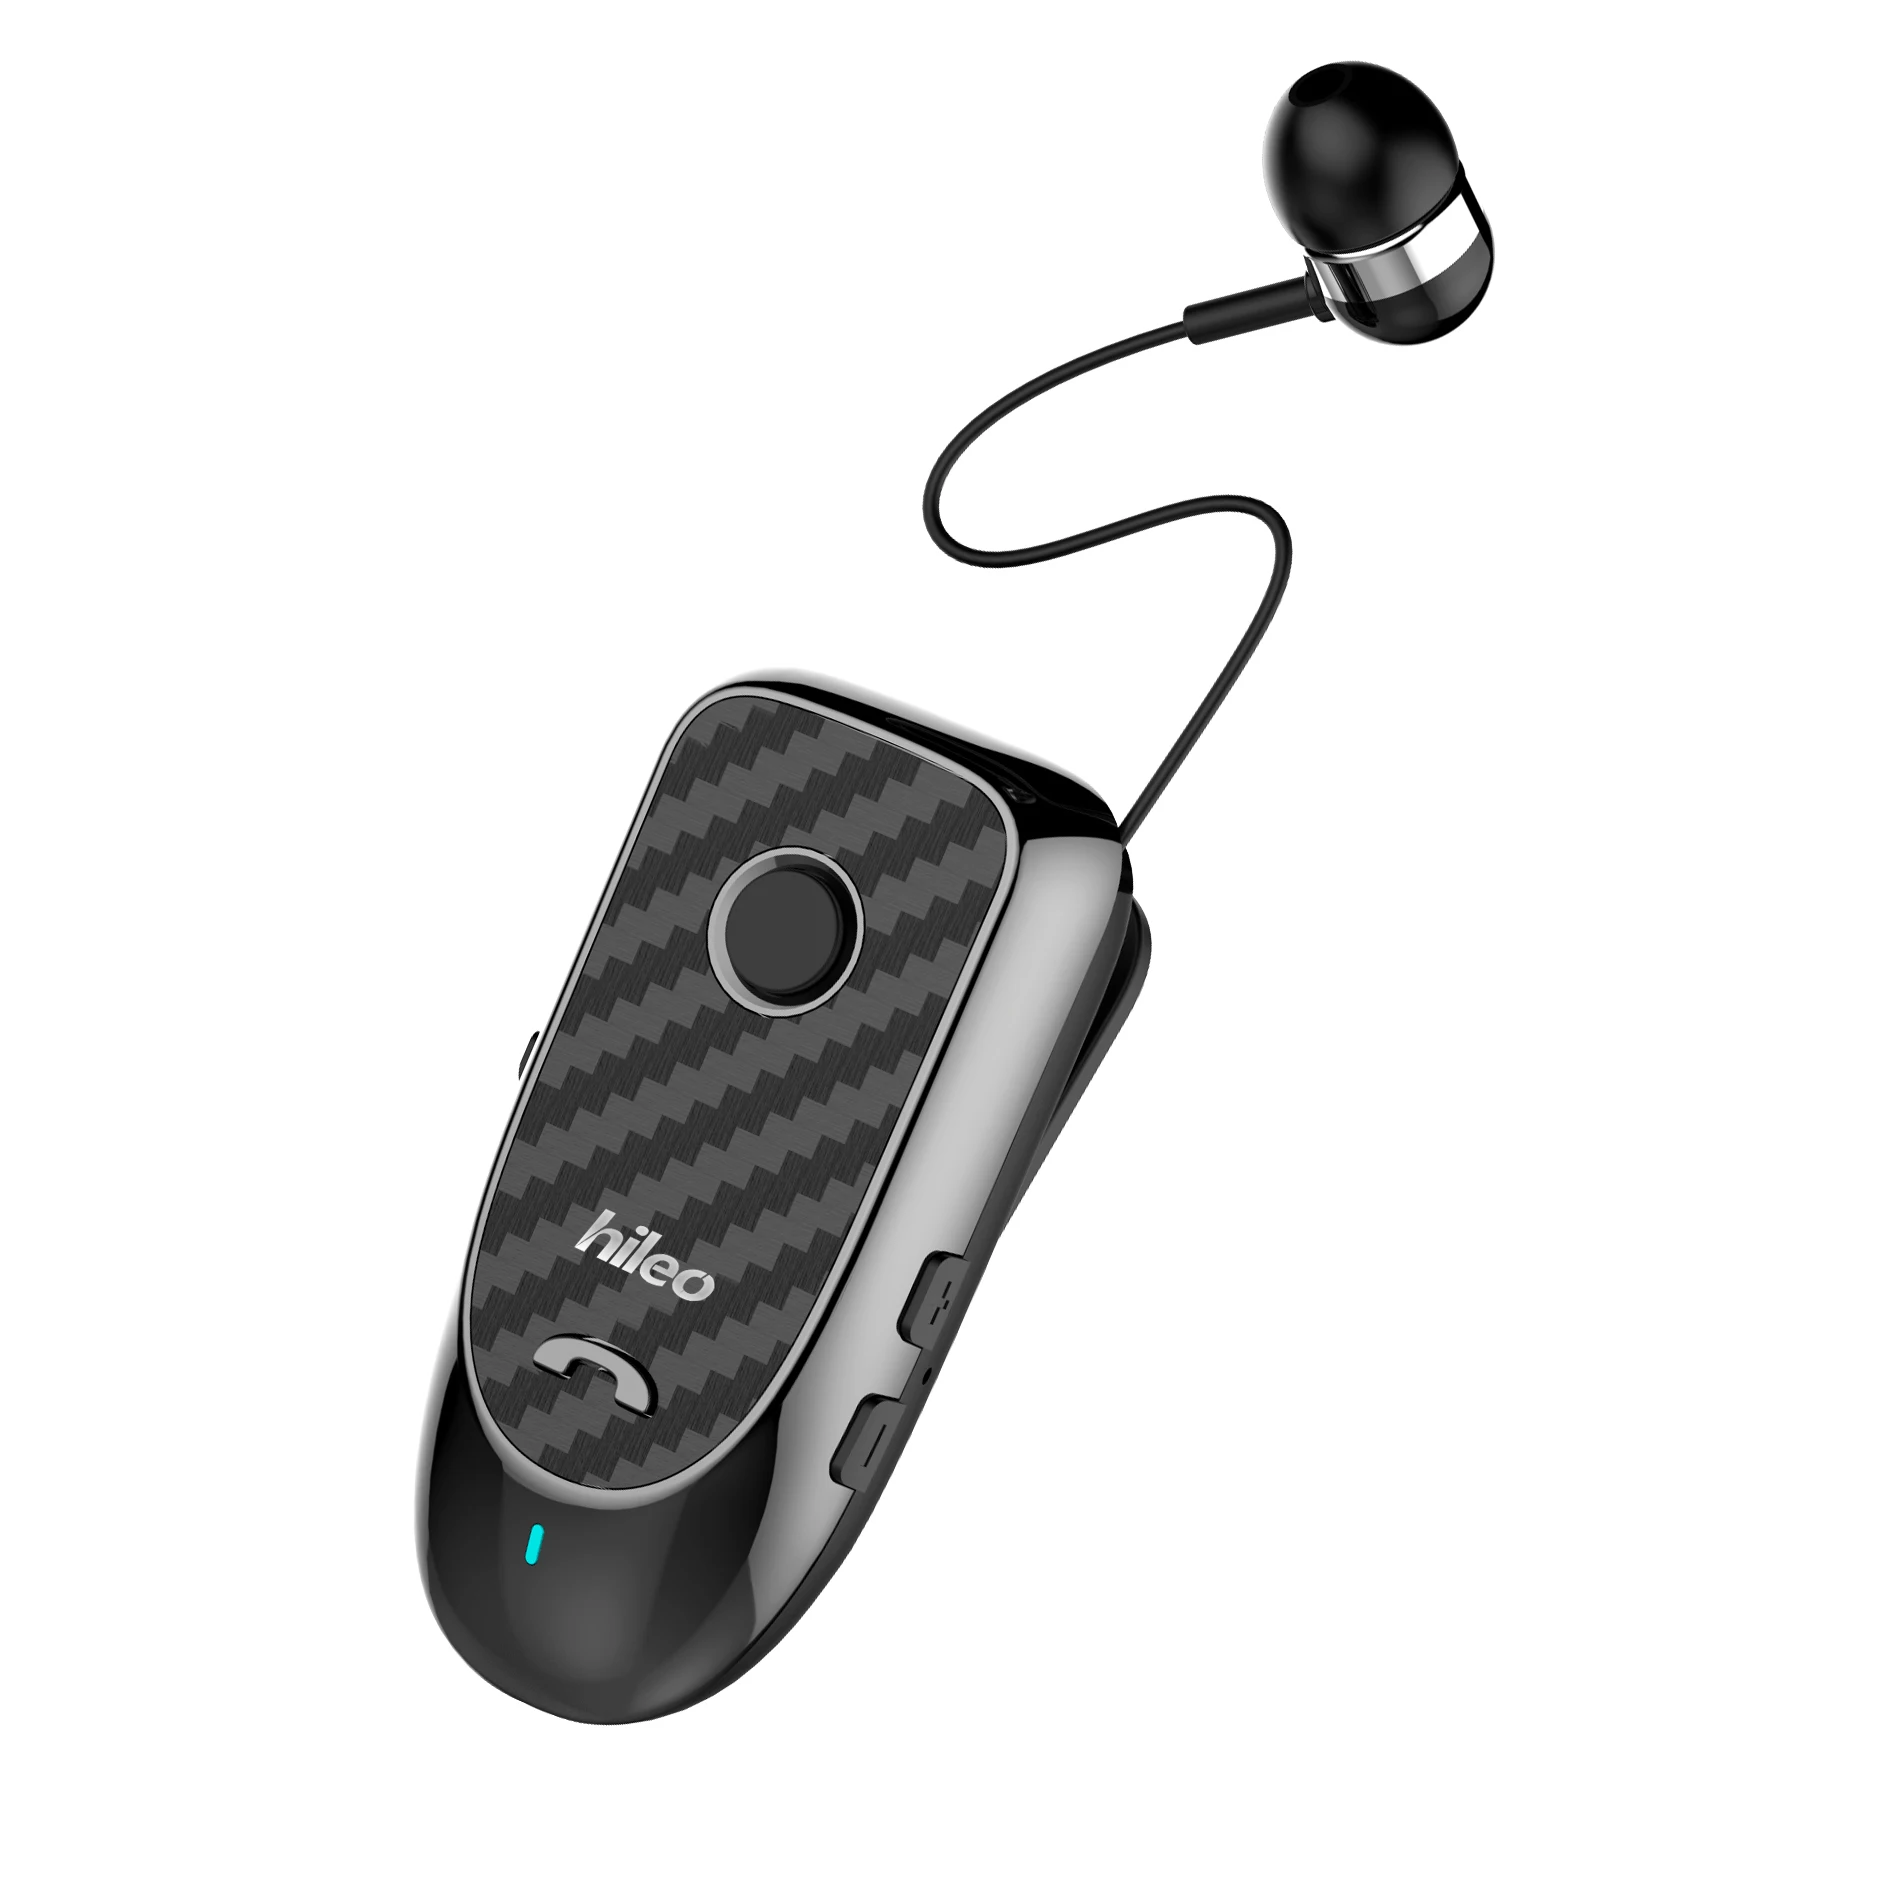 Hileo Hi60 Wireless Bluetooth Earphones Headset Car Earbuds Call Remind Vibration Clip Driver Auriculares Hands Free F920 F910